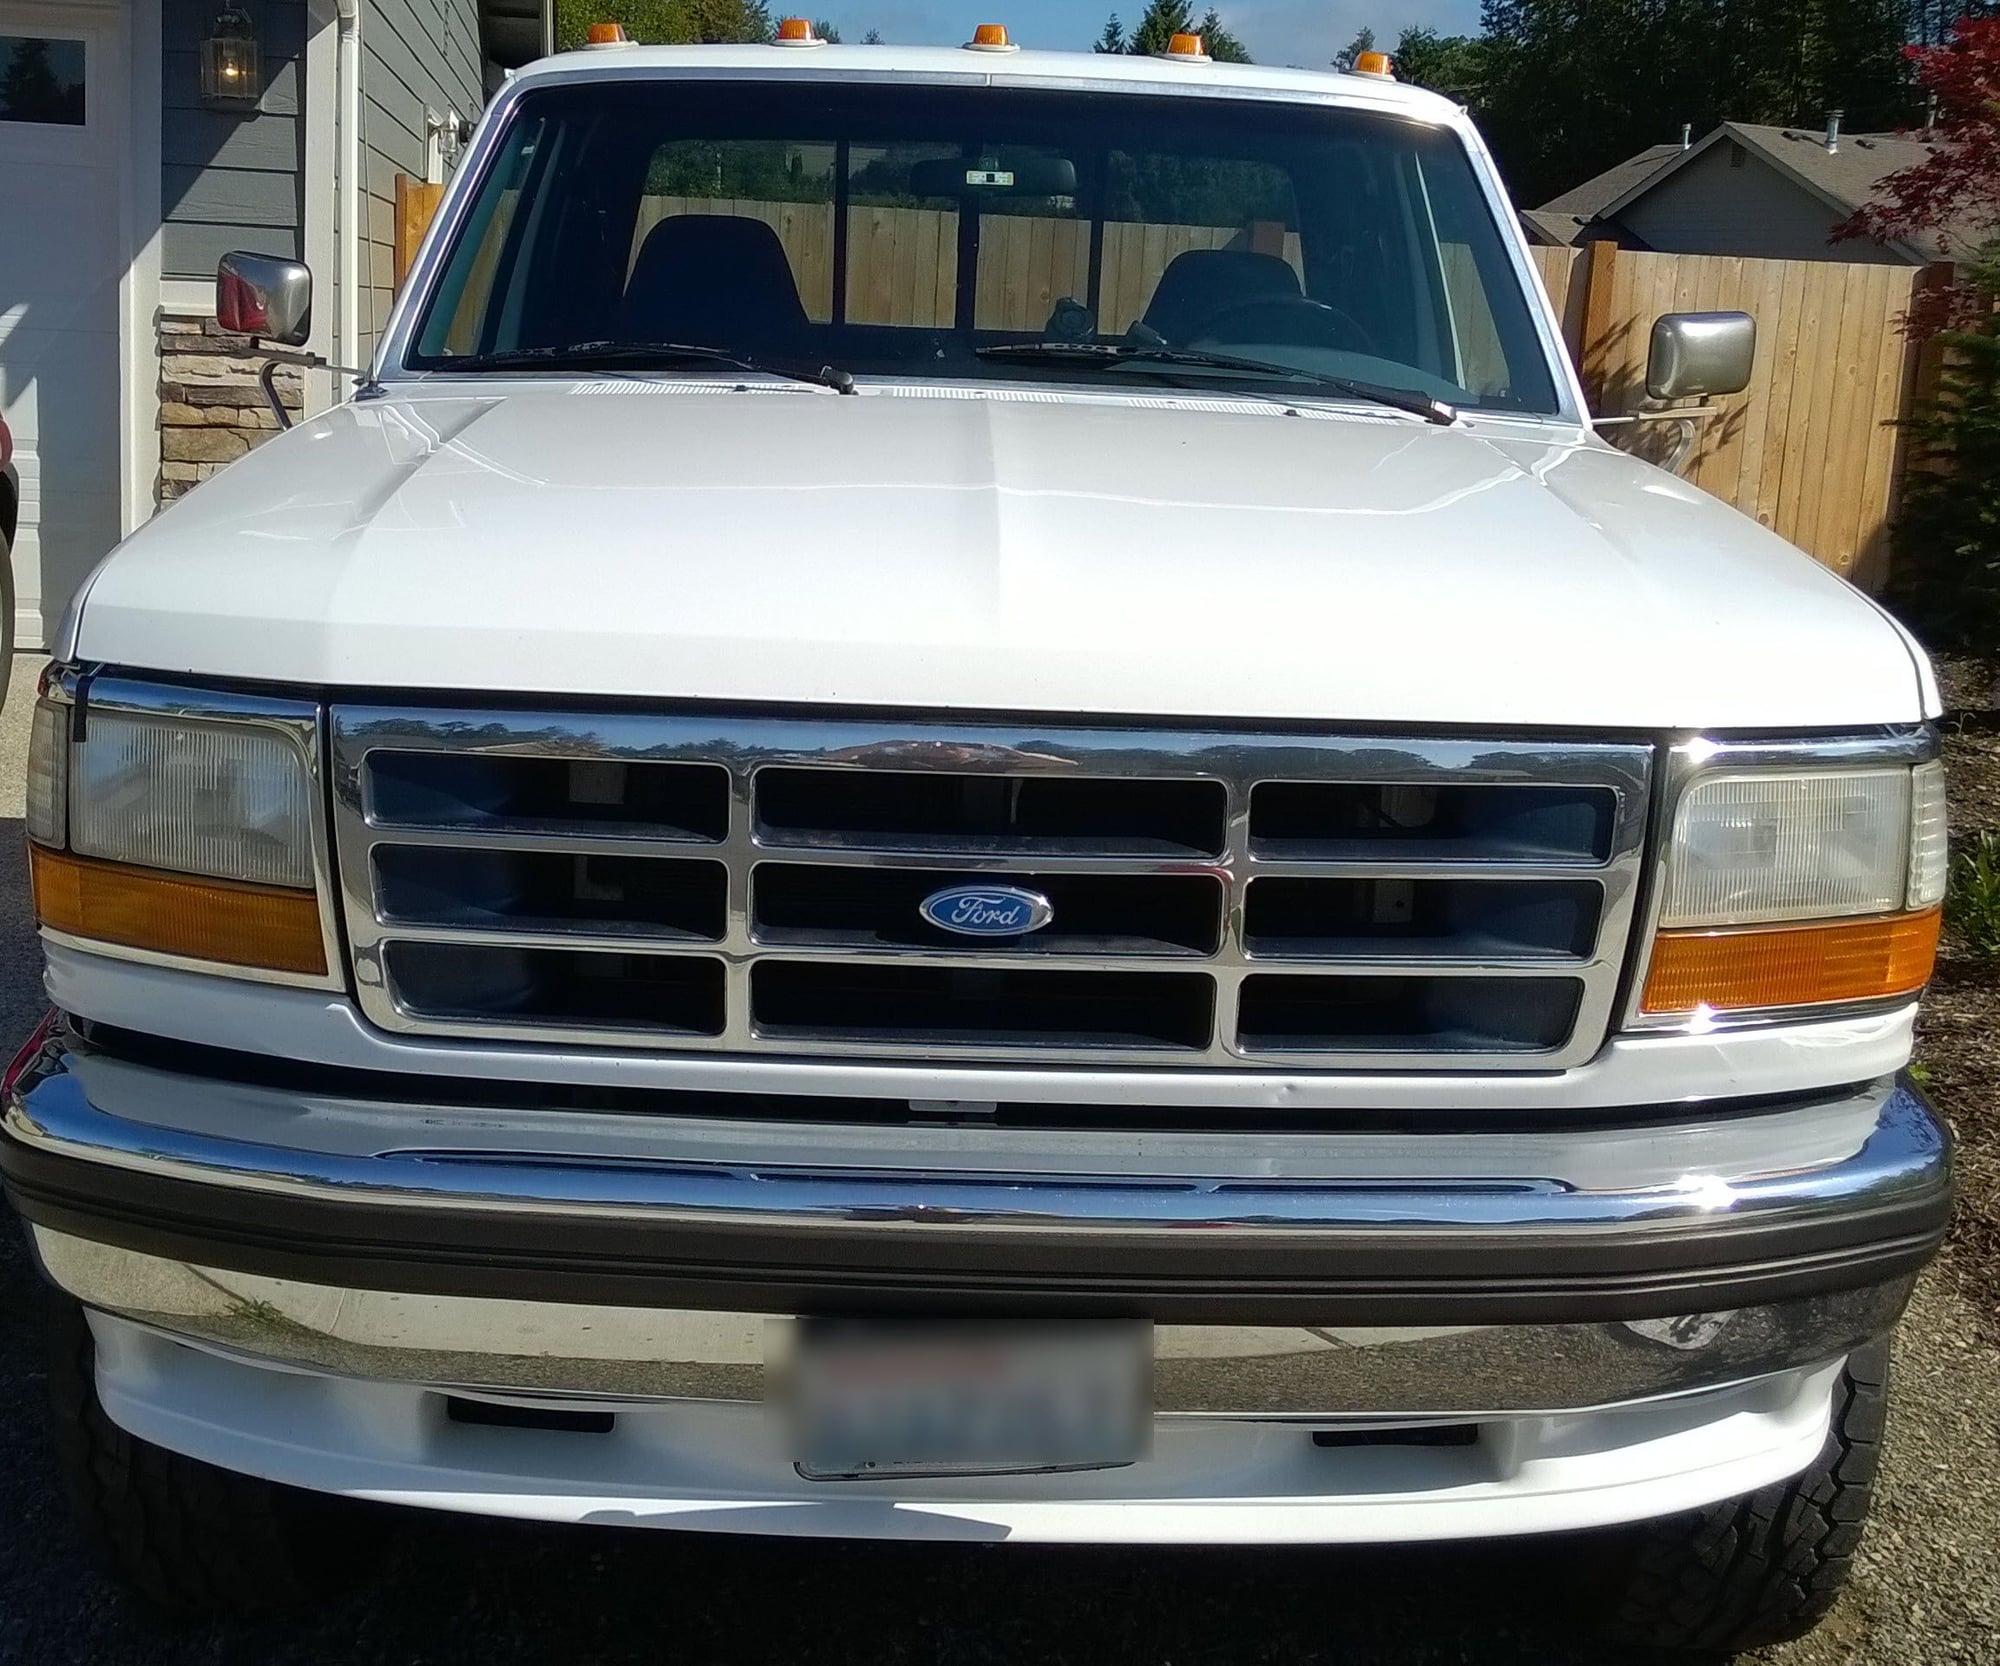 SOLD ***1994 F-250 XLT 4x4 7.5L - Equipped to haul! - Ford ...